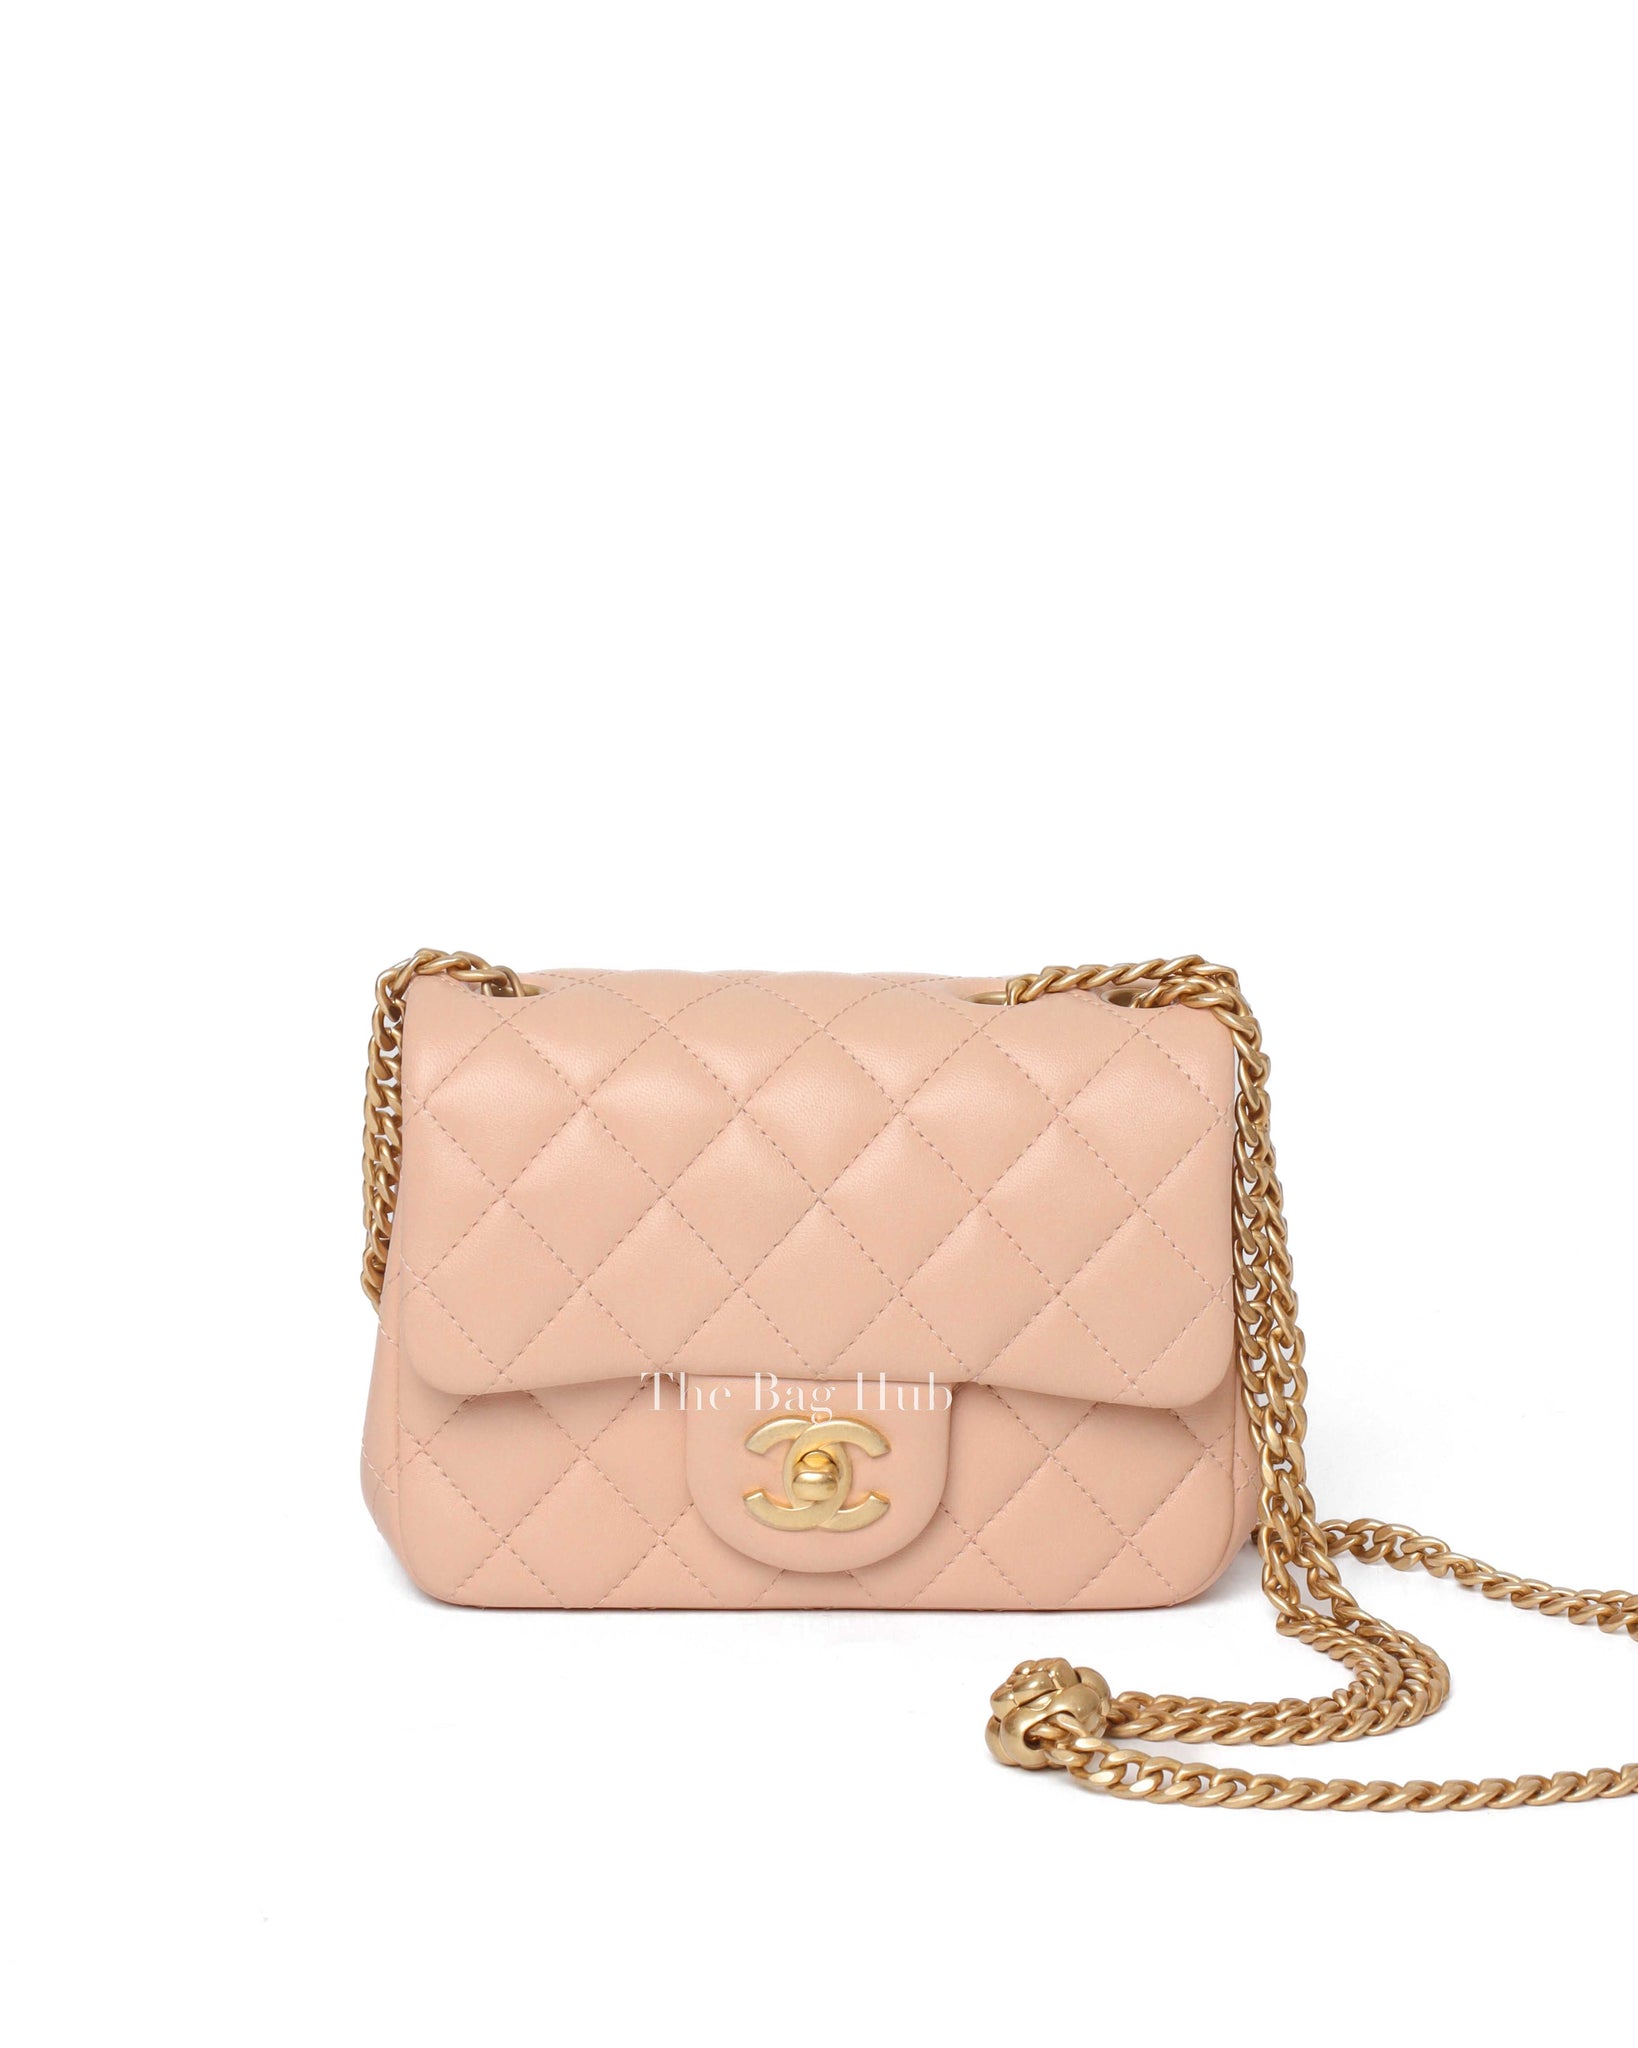 Chanel Nude Lambskin Sweet Camellia Adjustable Chain Square Flap Bag Aged Gold HW-2